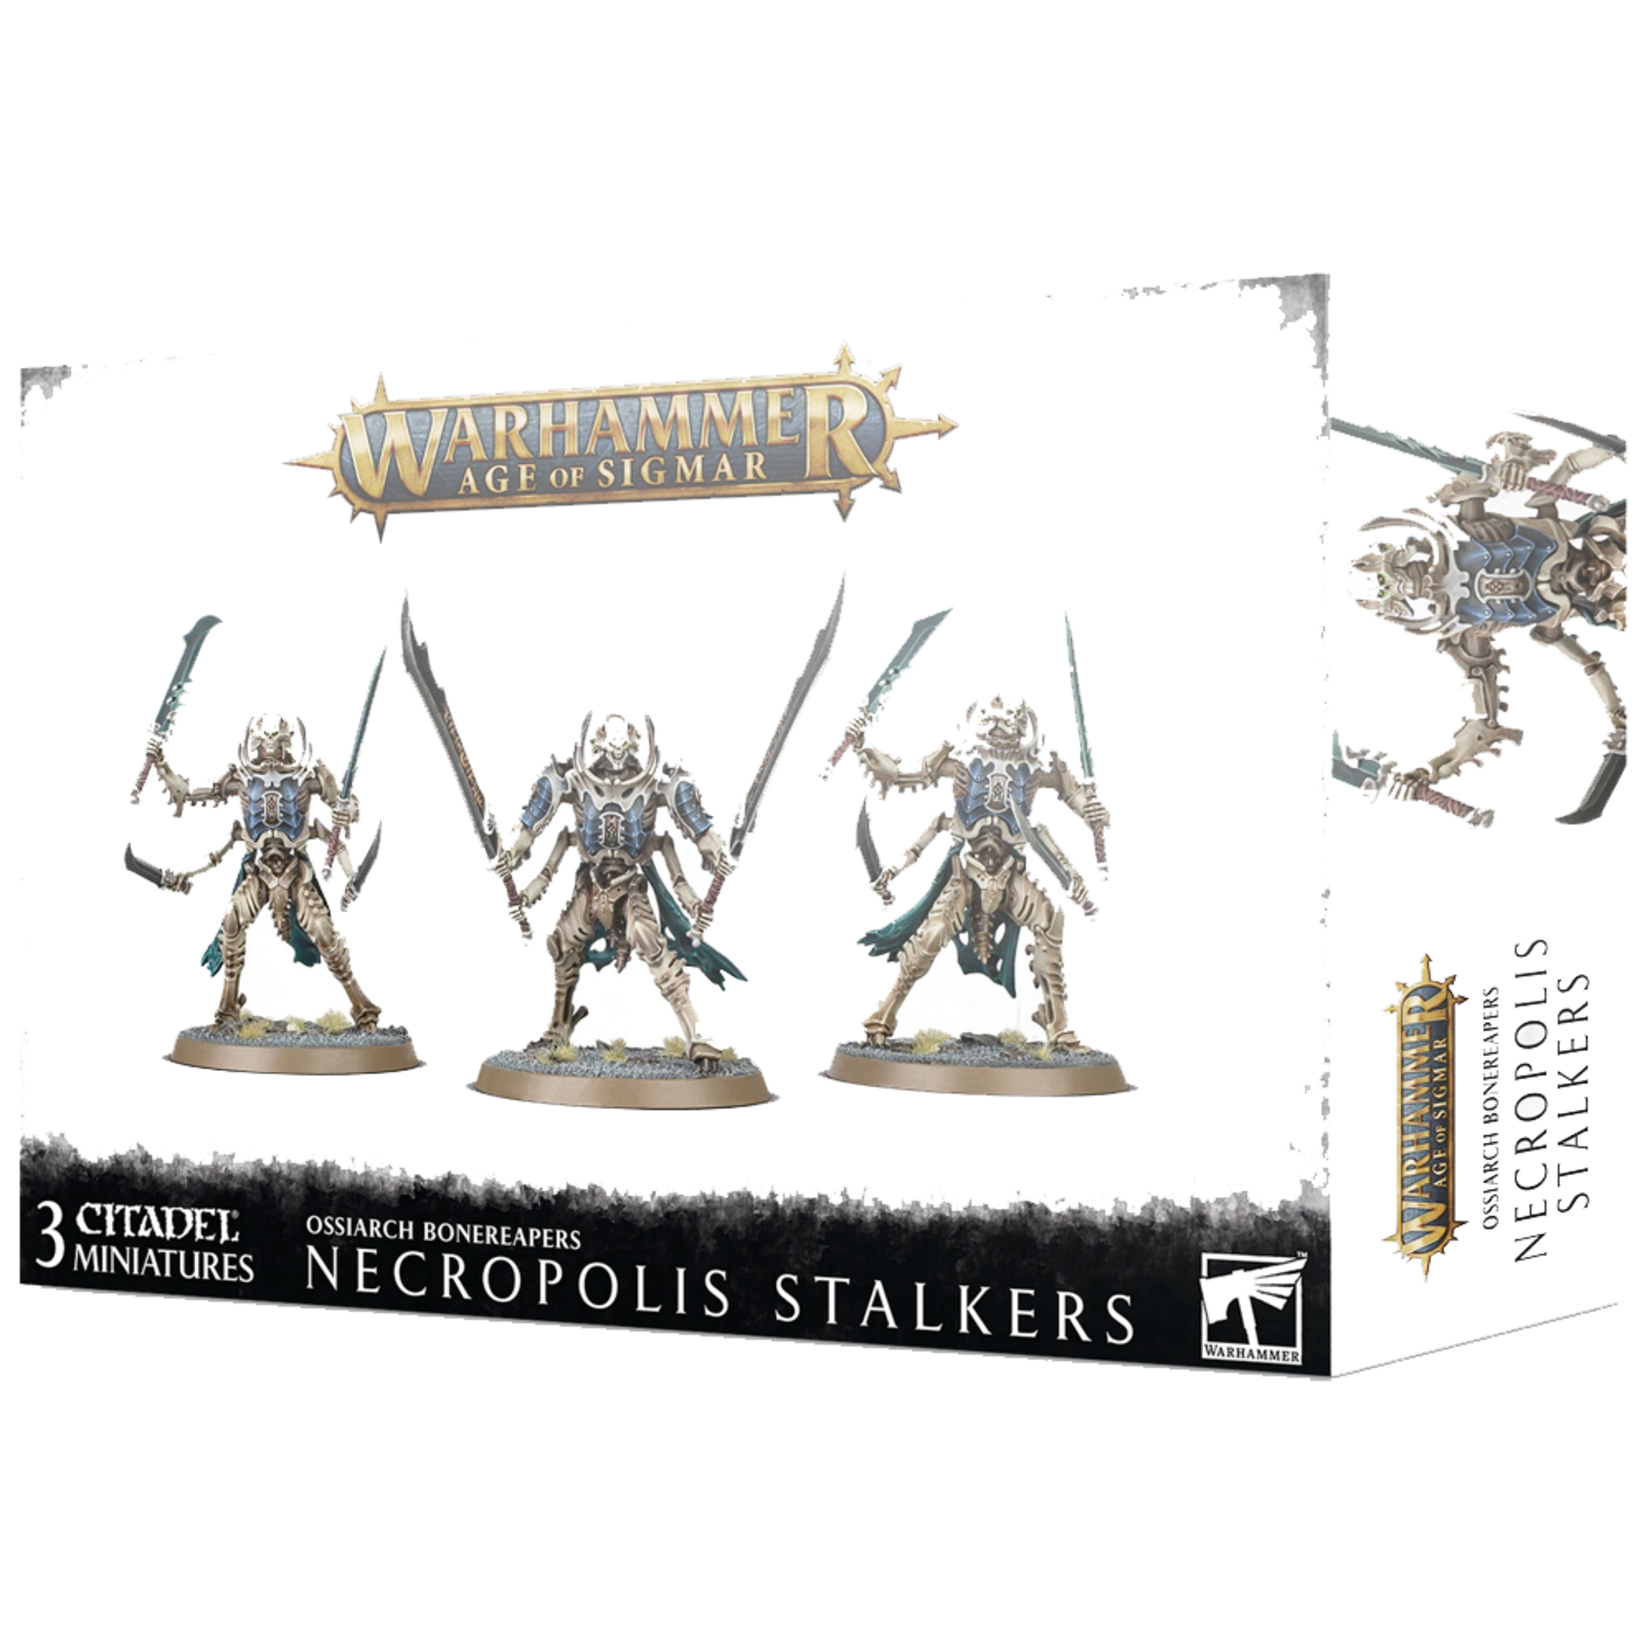 Ossiarch Bonereapers Necropolis Stalkers (AOS)